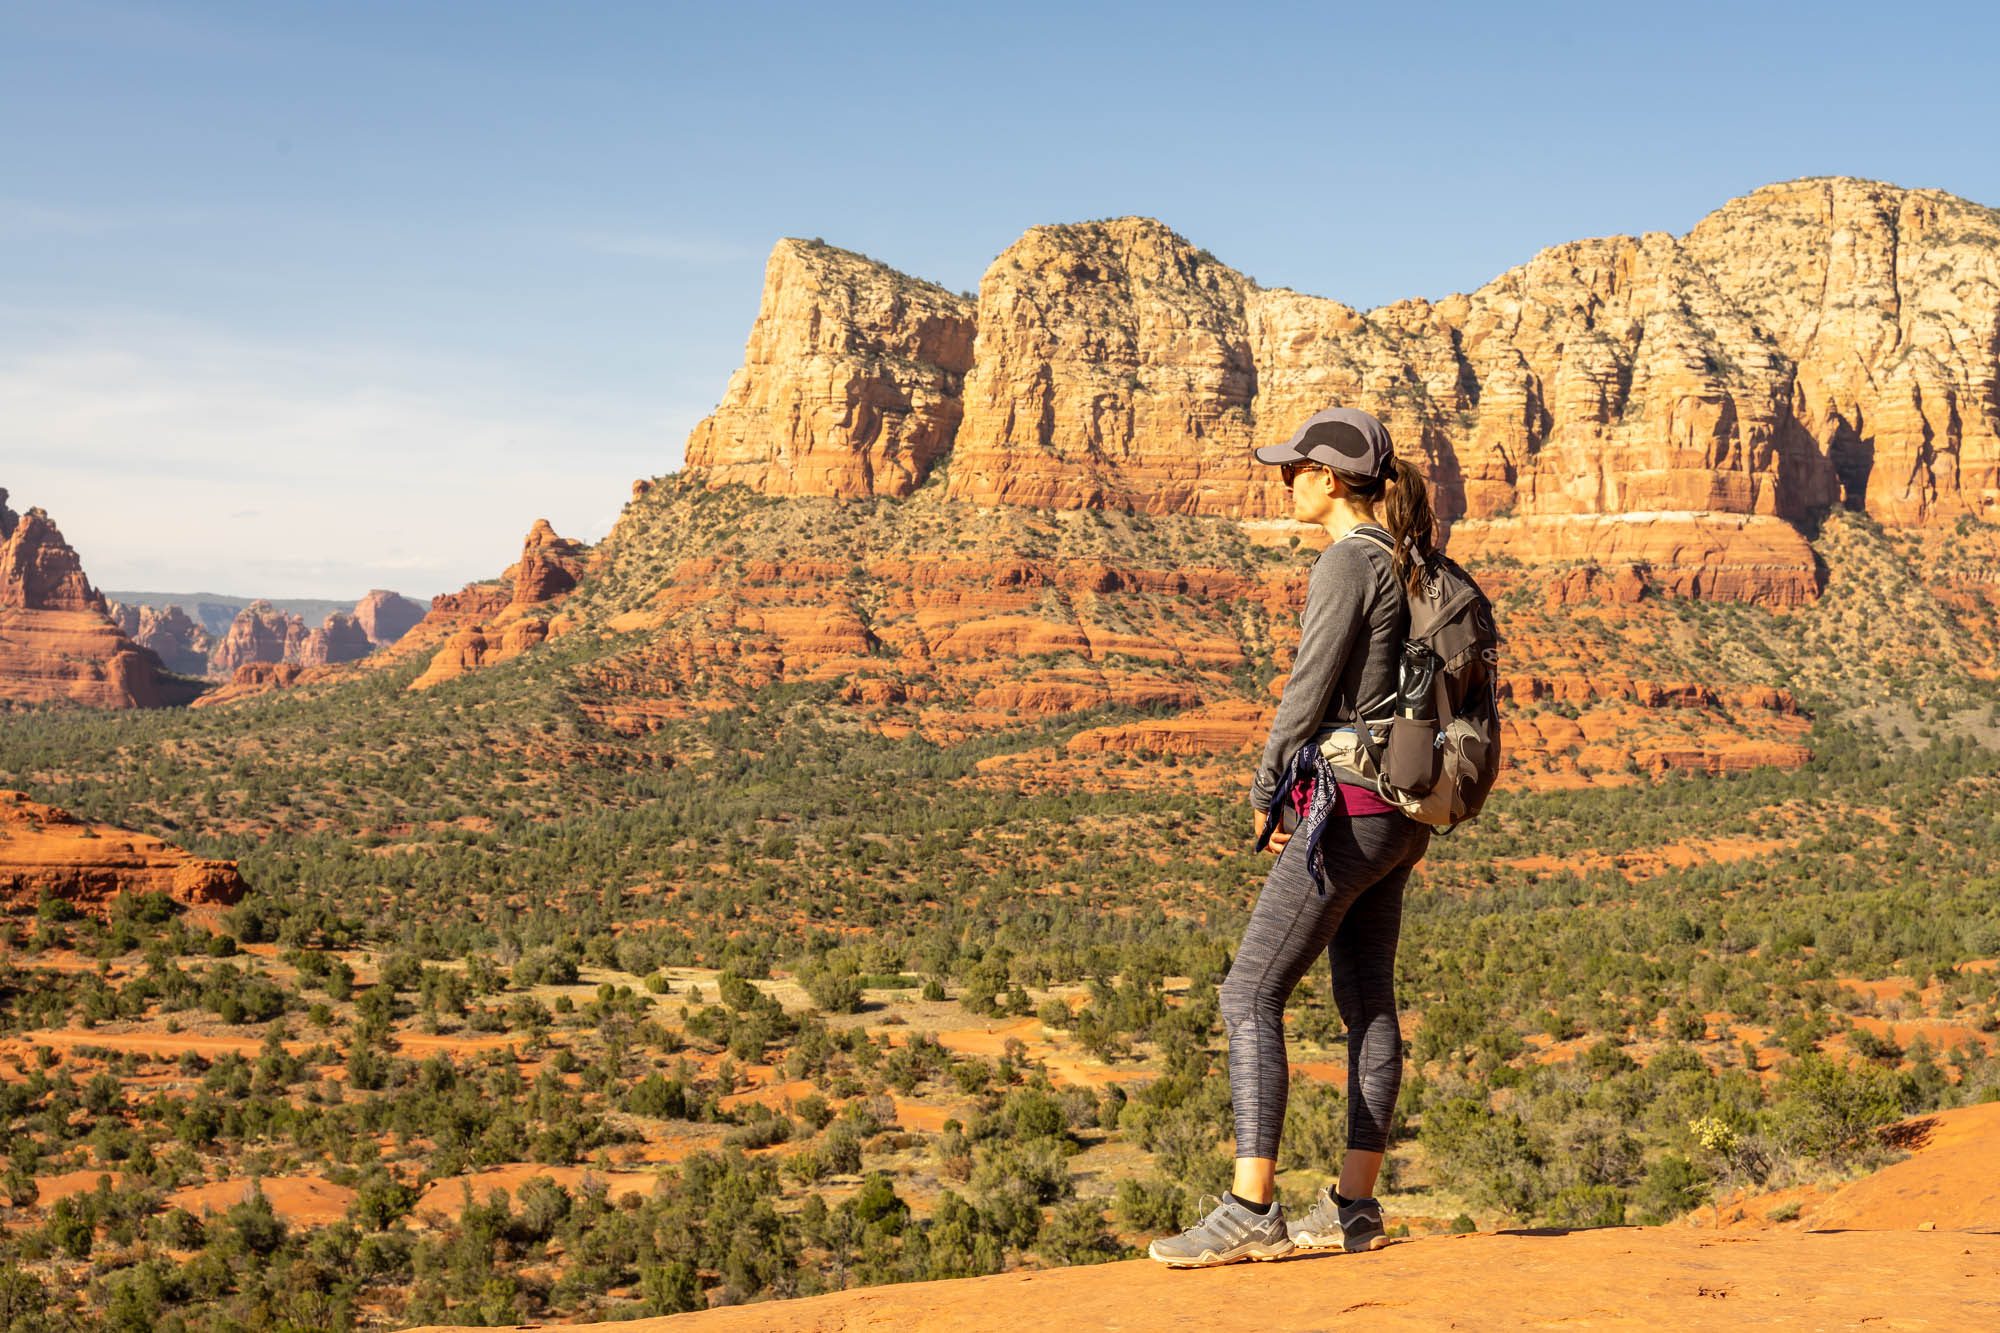 The 9 Best Hikes In Sedona, AZ A Complete Hiking Guide